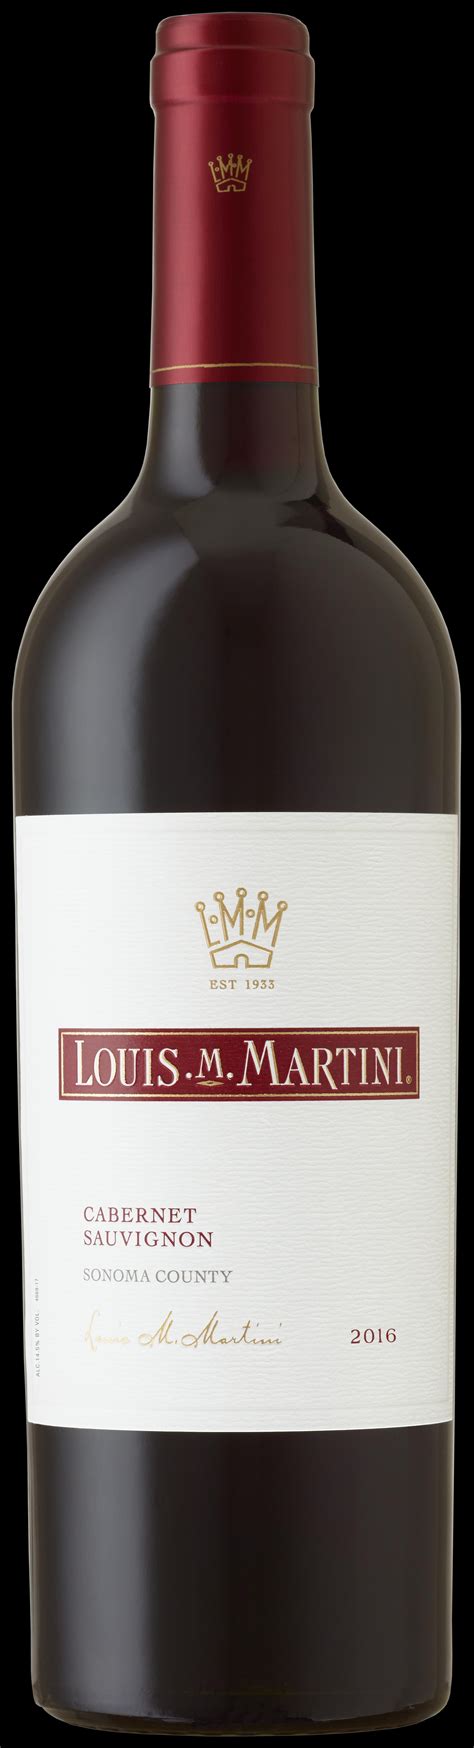 Louis m martini. Our wines are perfectly aged. We need to make sure you are, too. This site is intended for those of legal drinking age. By entering the Louis M. Martini Winery website, you affirm that you are of legal drinking age in the country where the site is accessed and that you agree to allowing us to use cookies and collect information about you as ... 